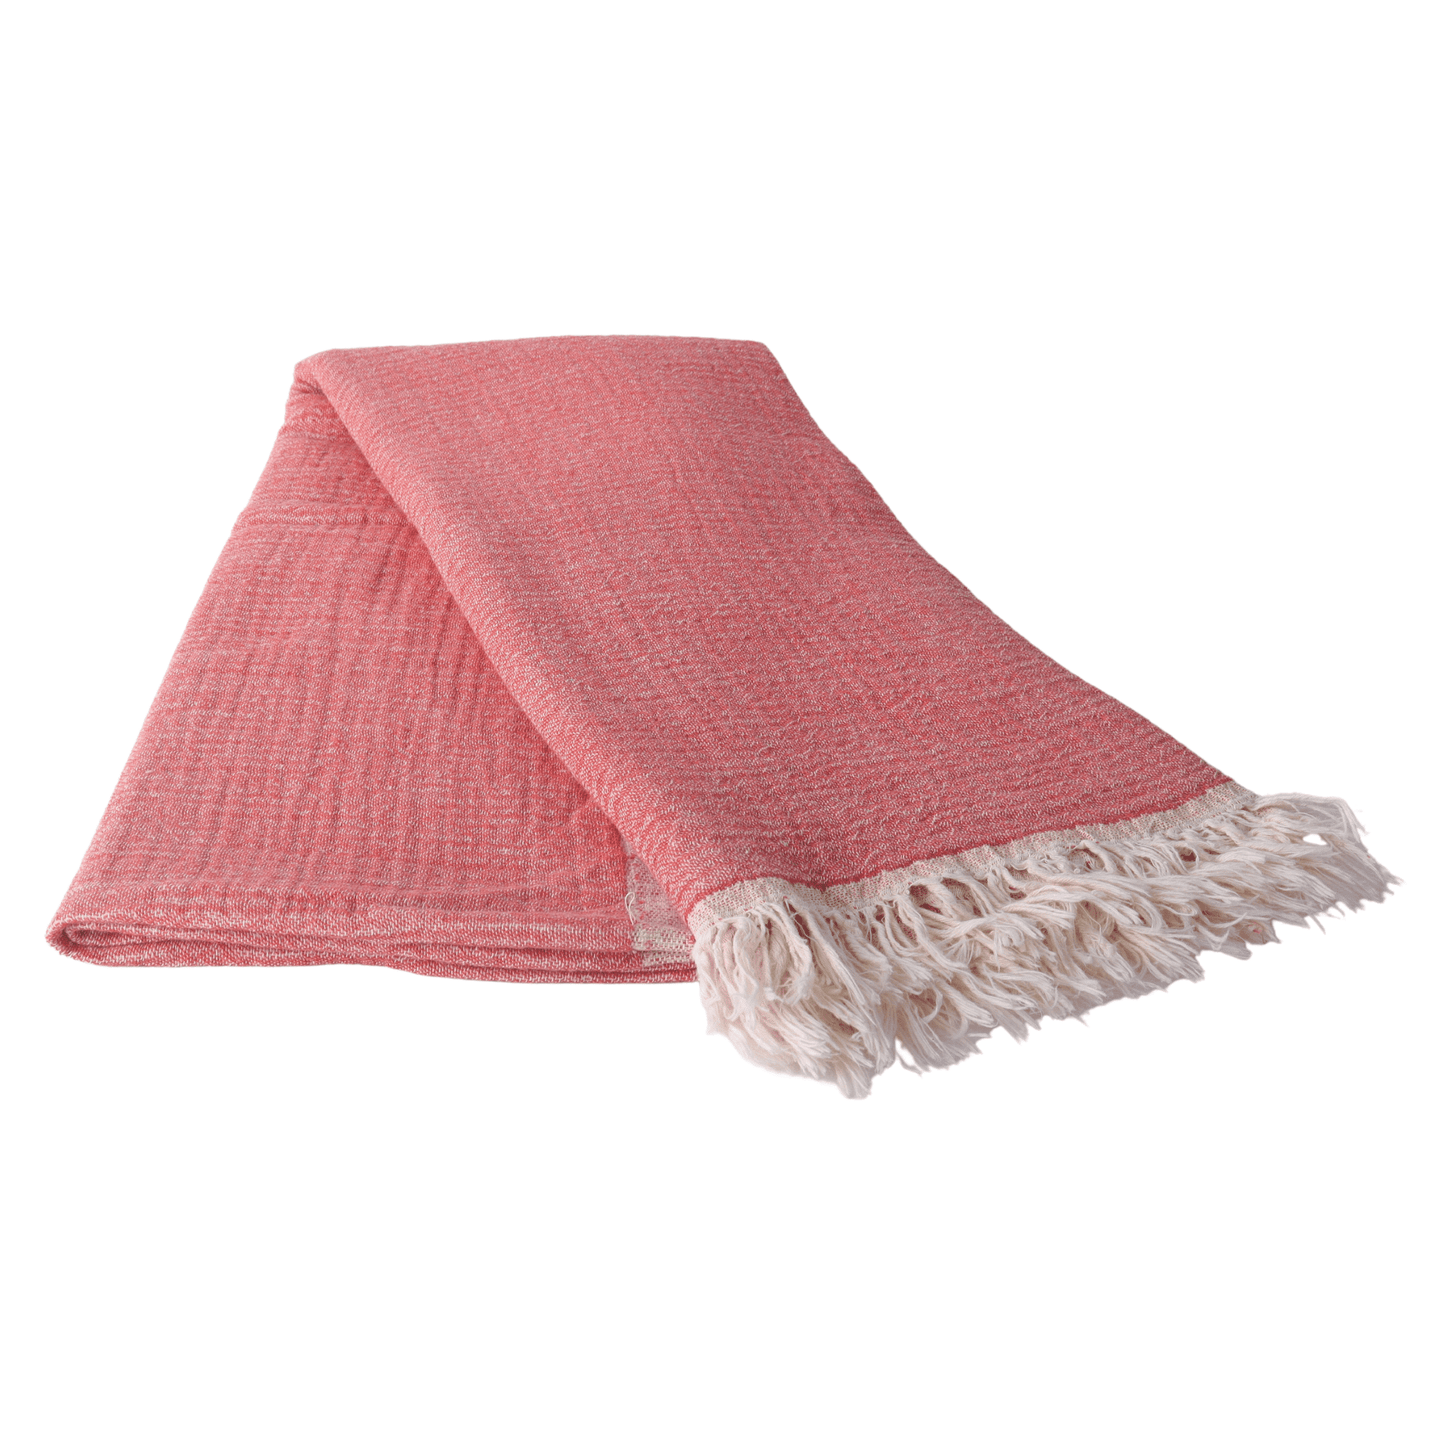 Muslin Towels for Adults rose 2